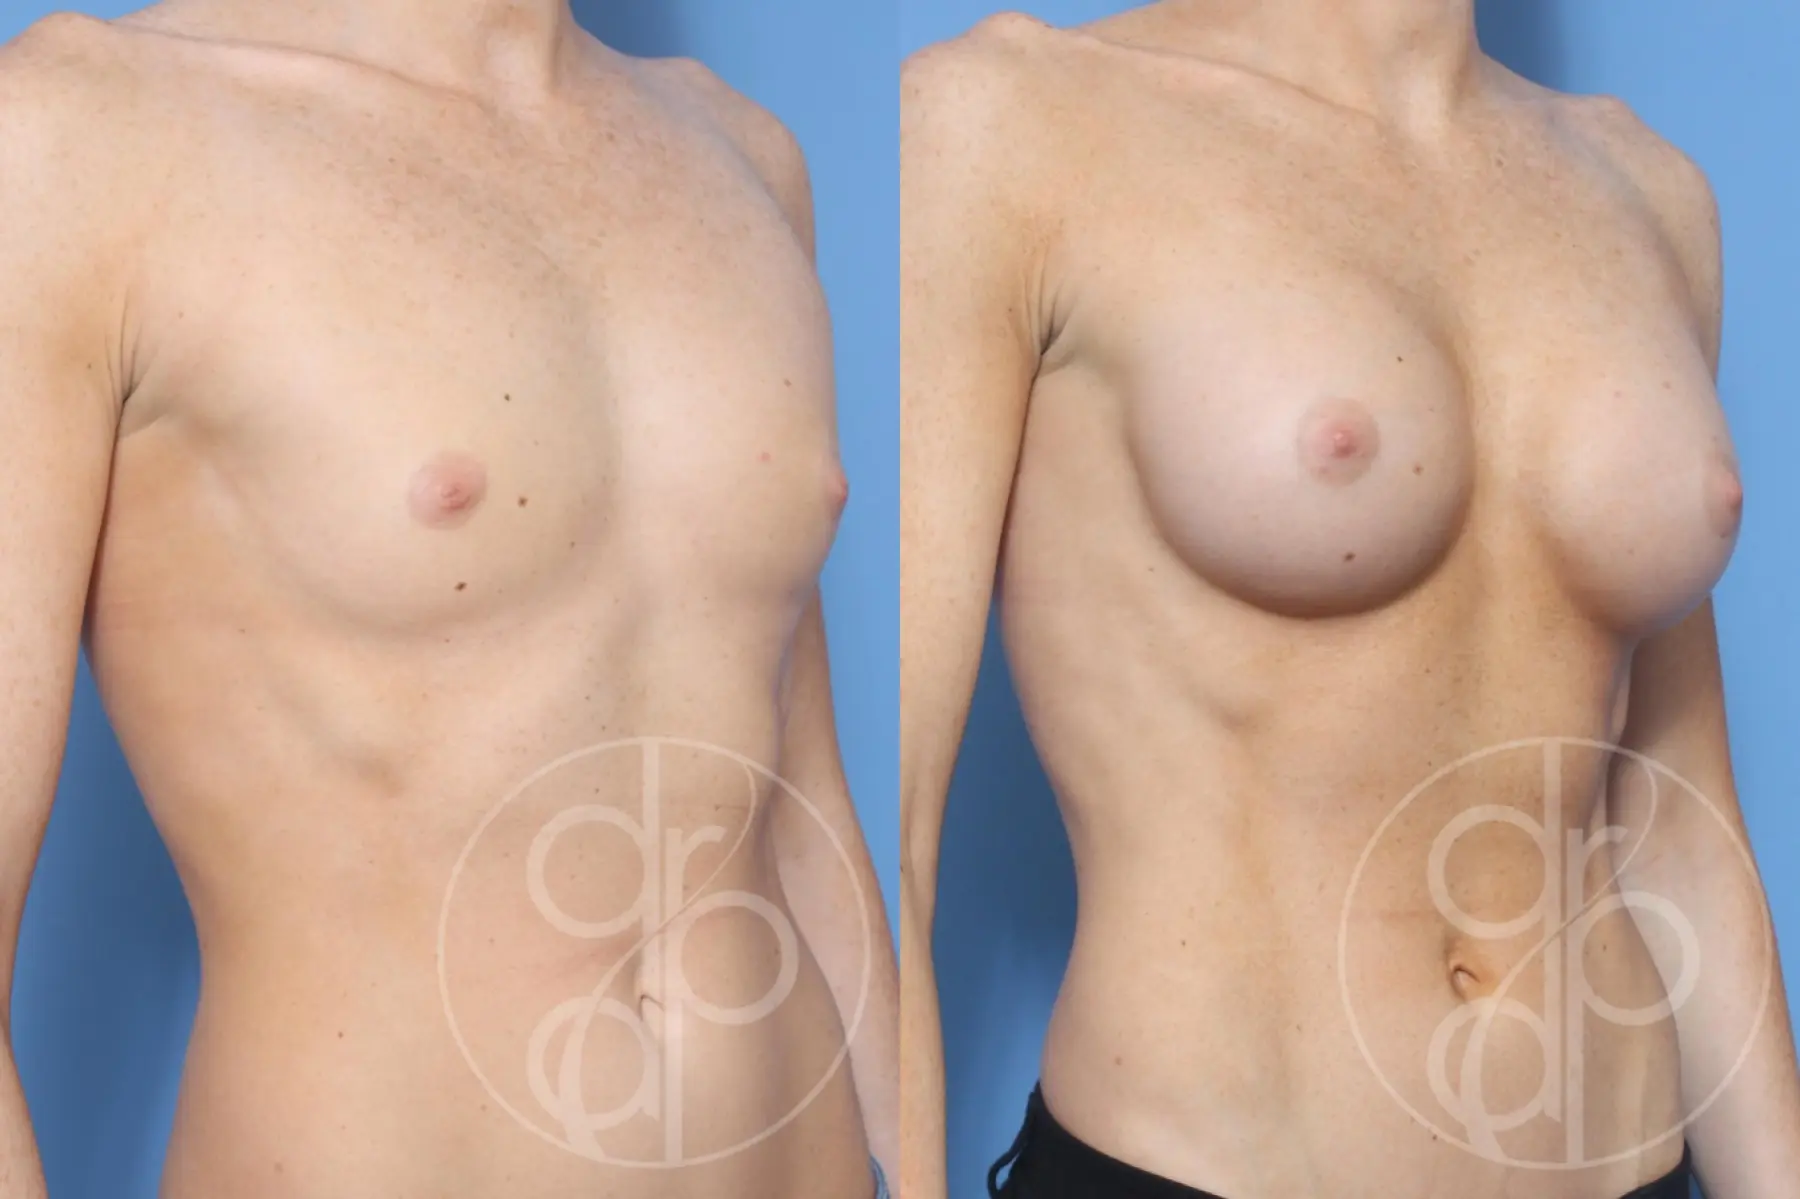 patient 11885 breast augmentation before and after result - Before and After 2